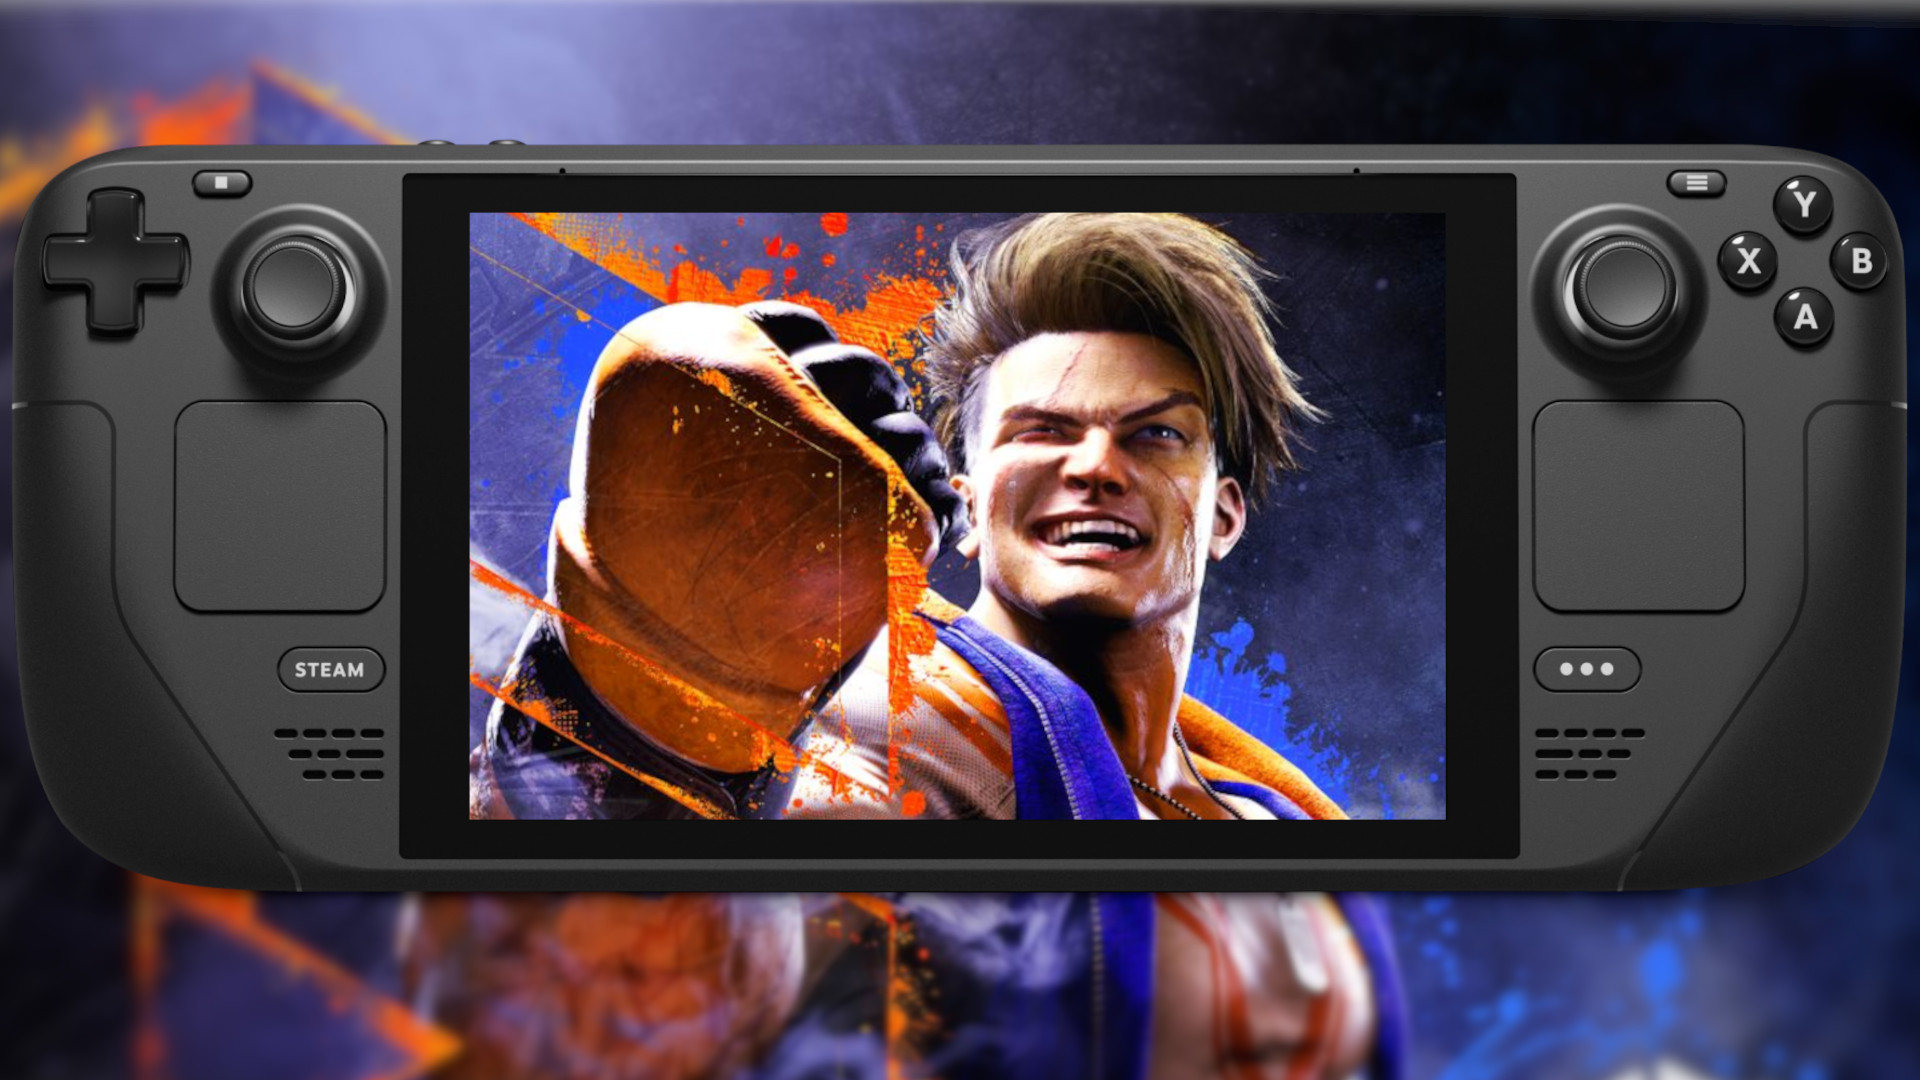 Nintendo Switch: Will Street Fighter 6 make its way to the Nintendo Switch?